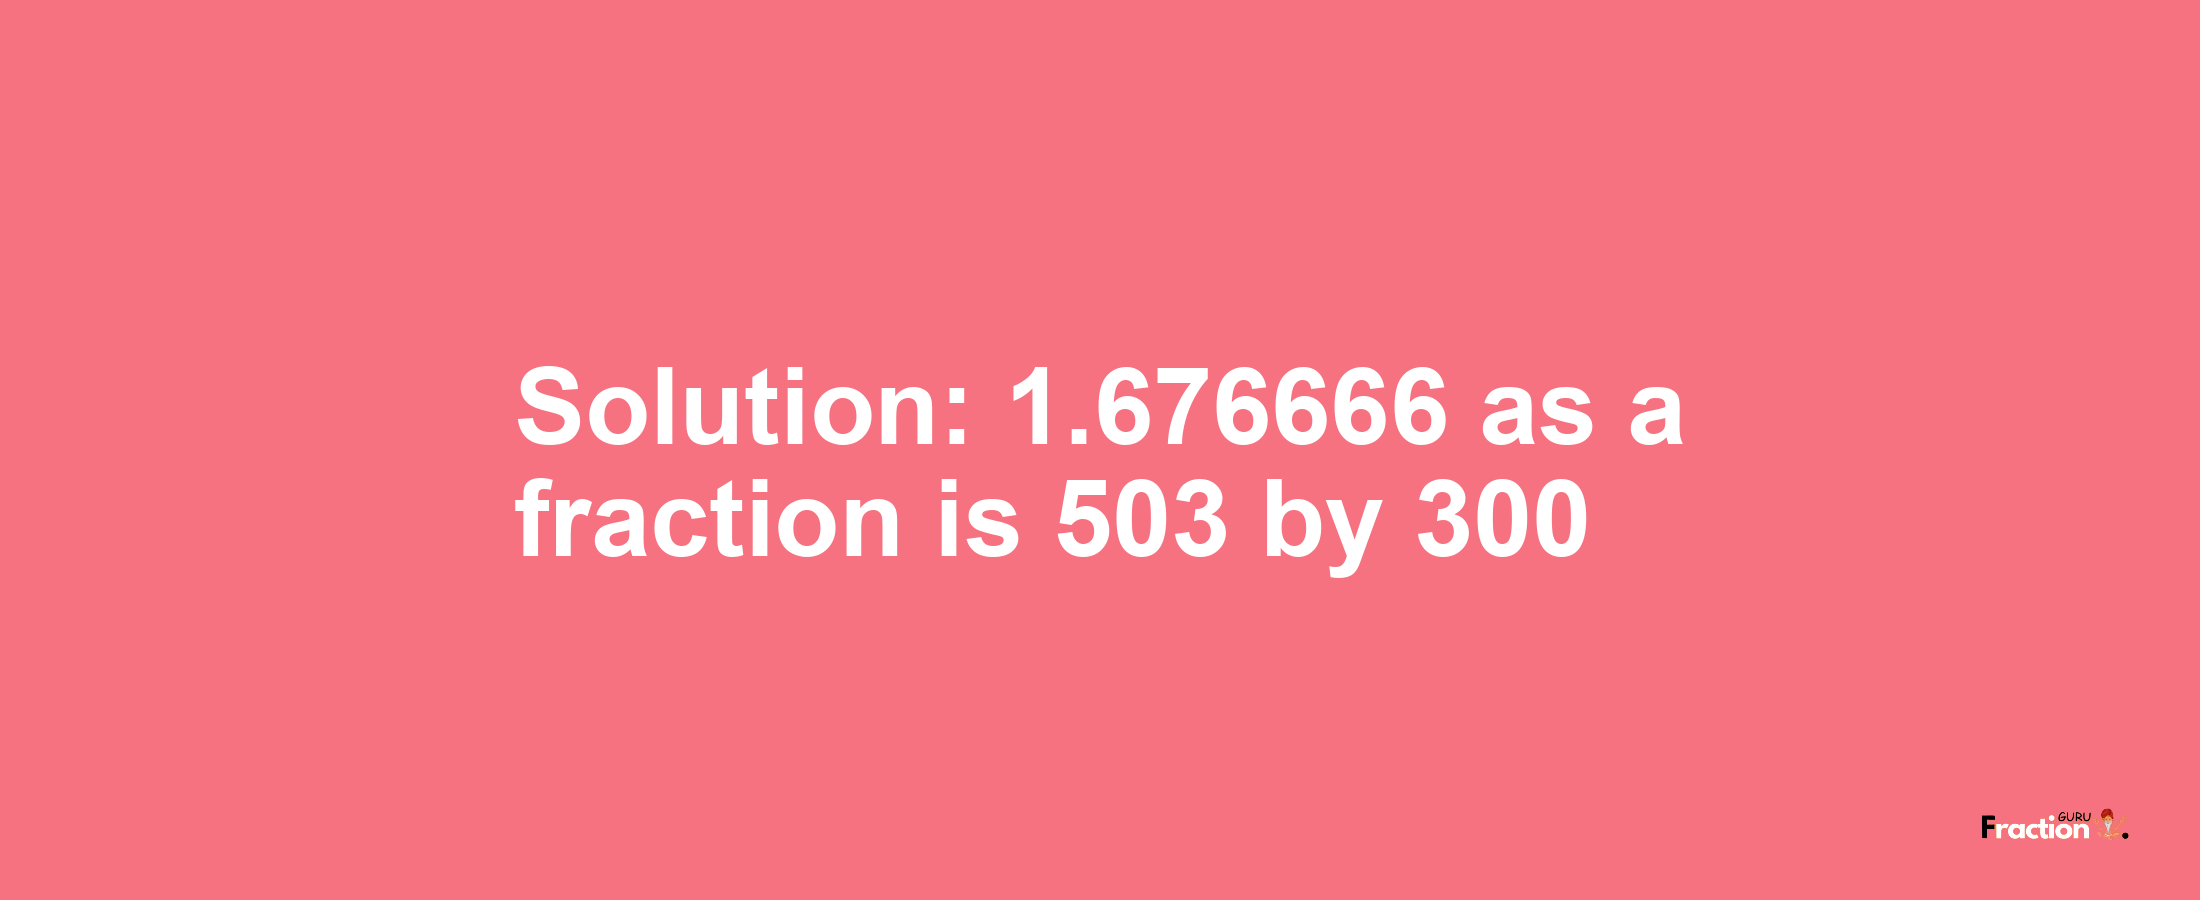 Solution:1.676666 as a fraction is 503/300